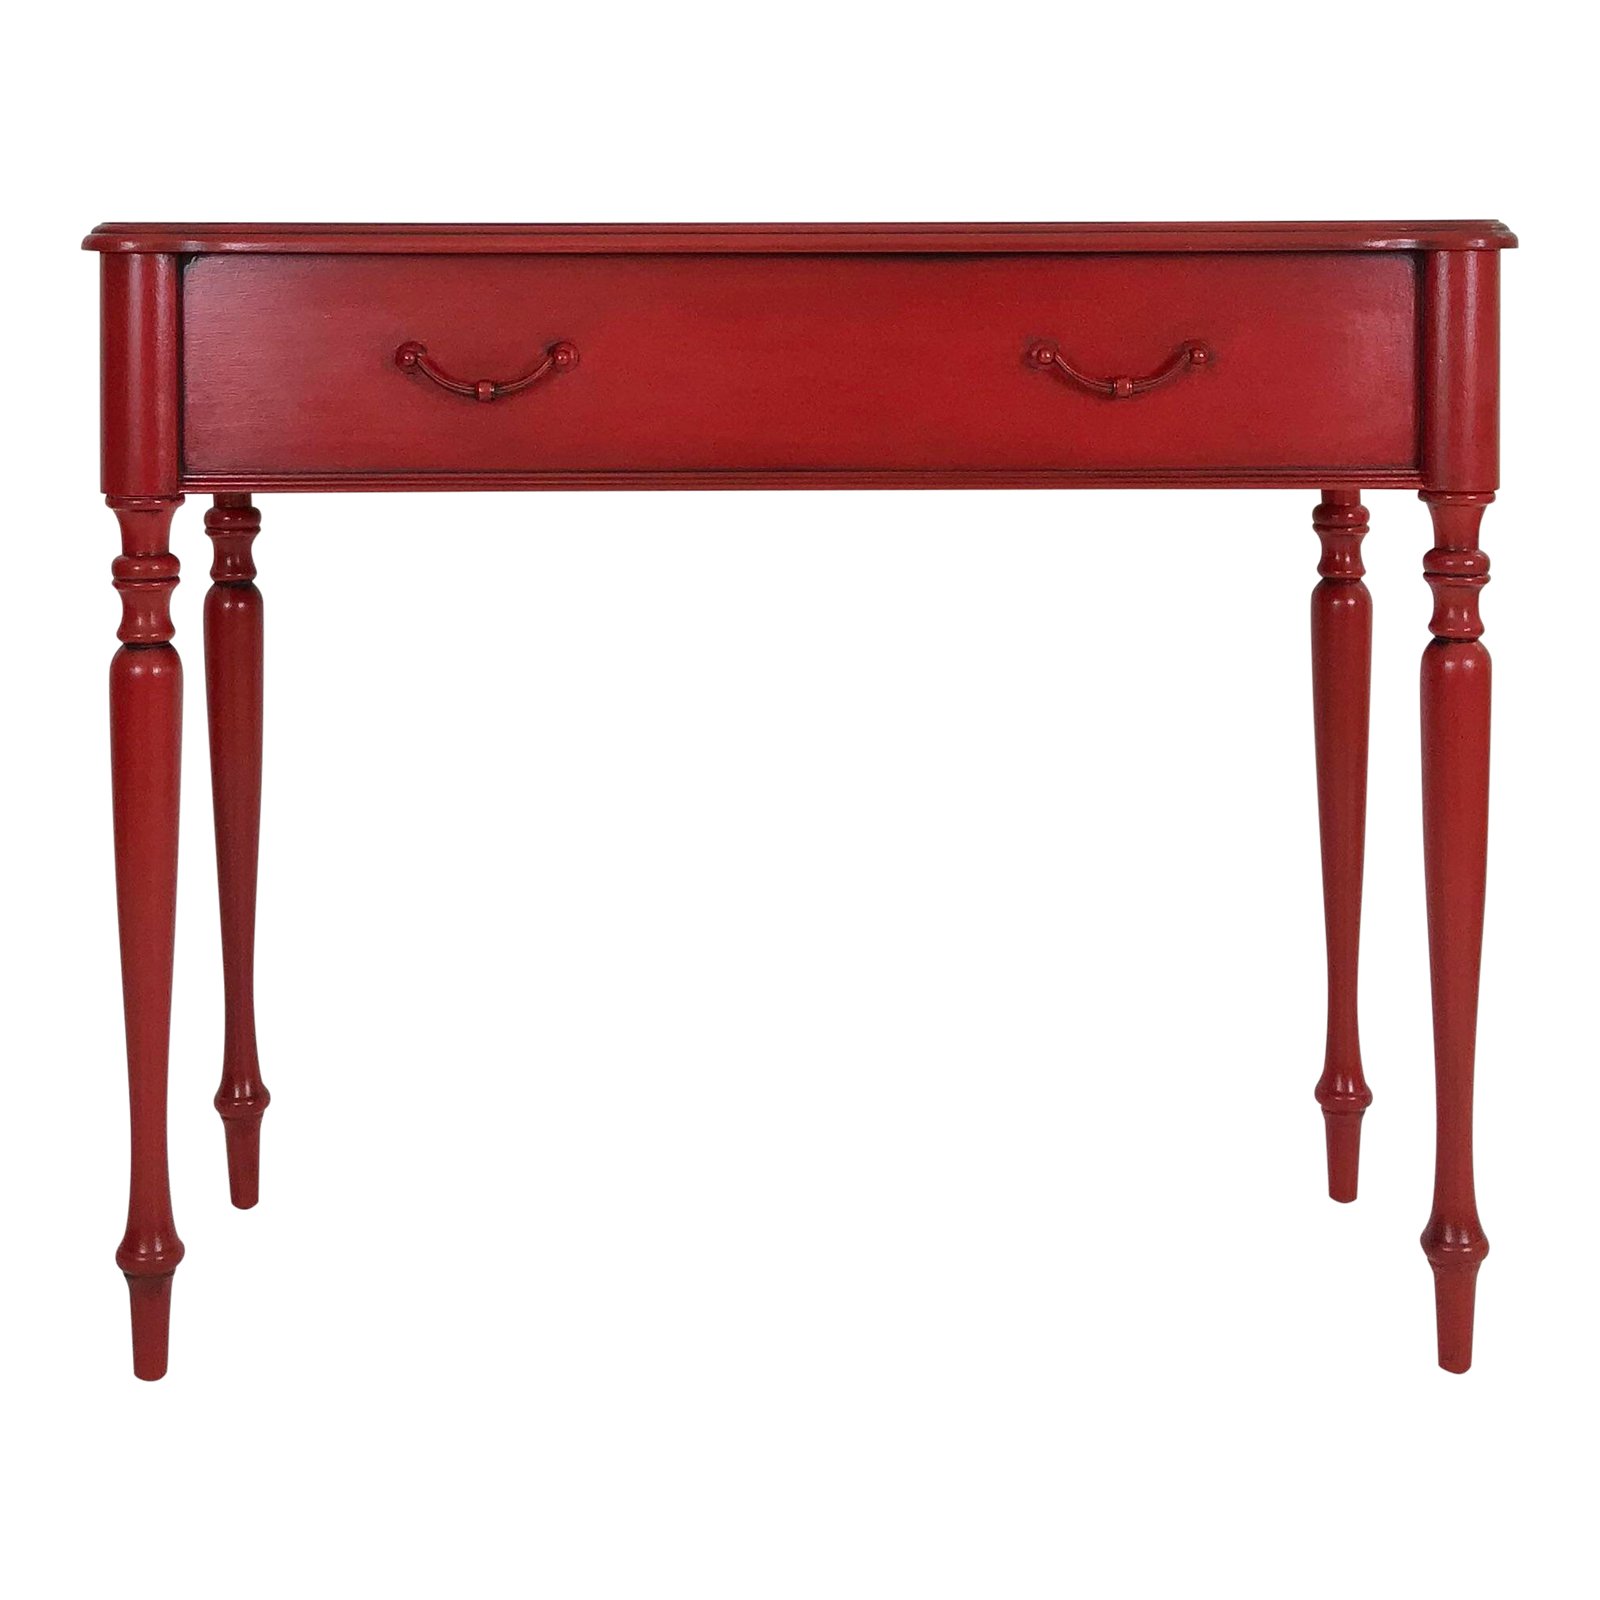 vintage the bombay company red accent table chairish wood side with drawers living room corner battery operated bedroom lights ballard designs outdoor cushions metal legs ikea